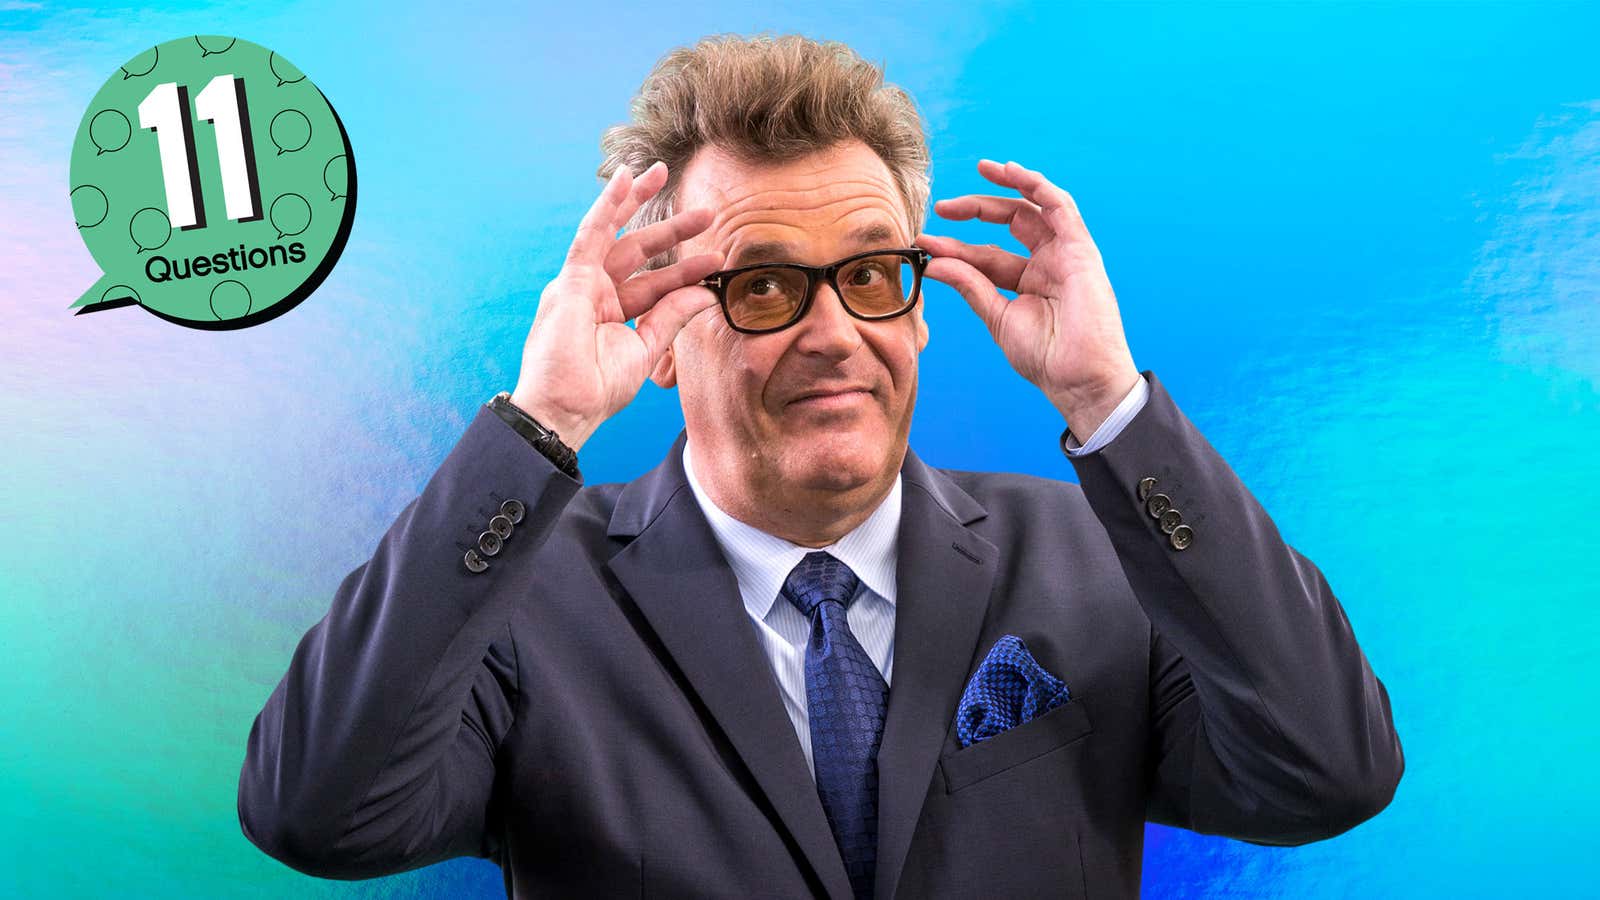 Greg Proops on Donald Trump’s cognitive decline and the proper way to eat hash browns